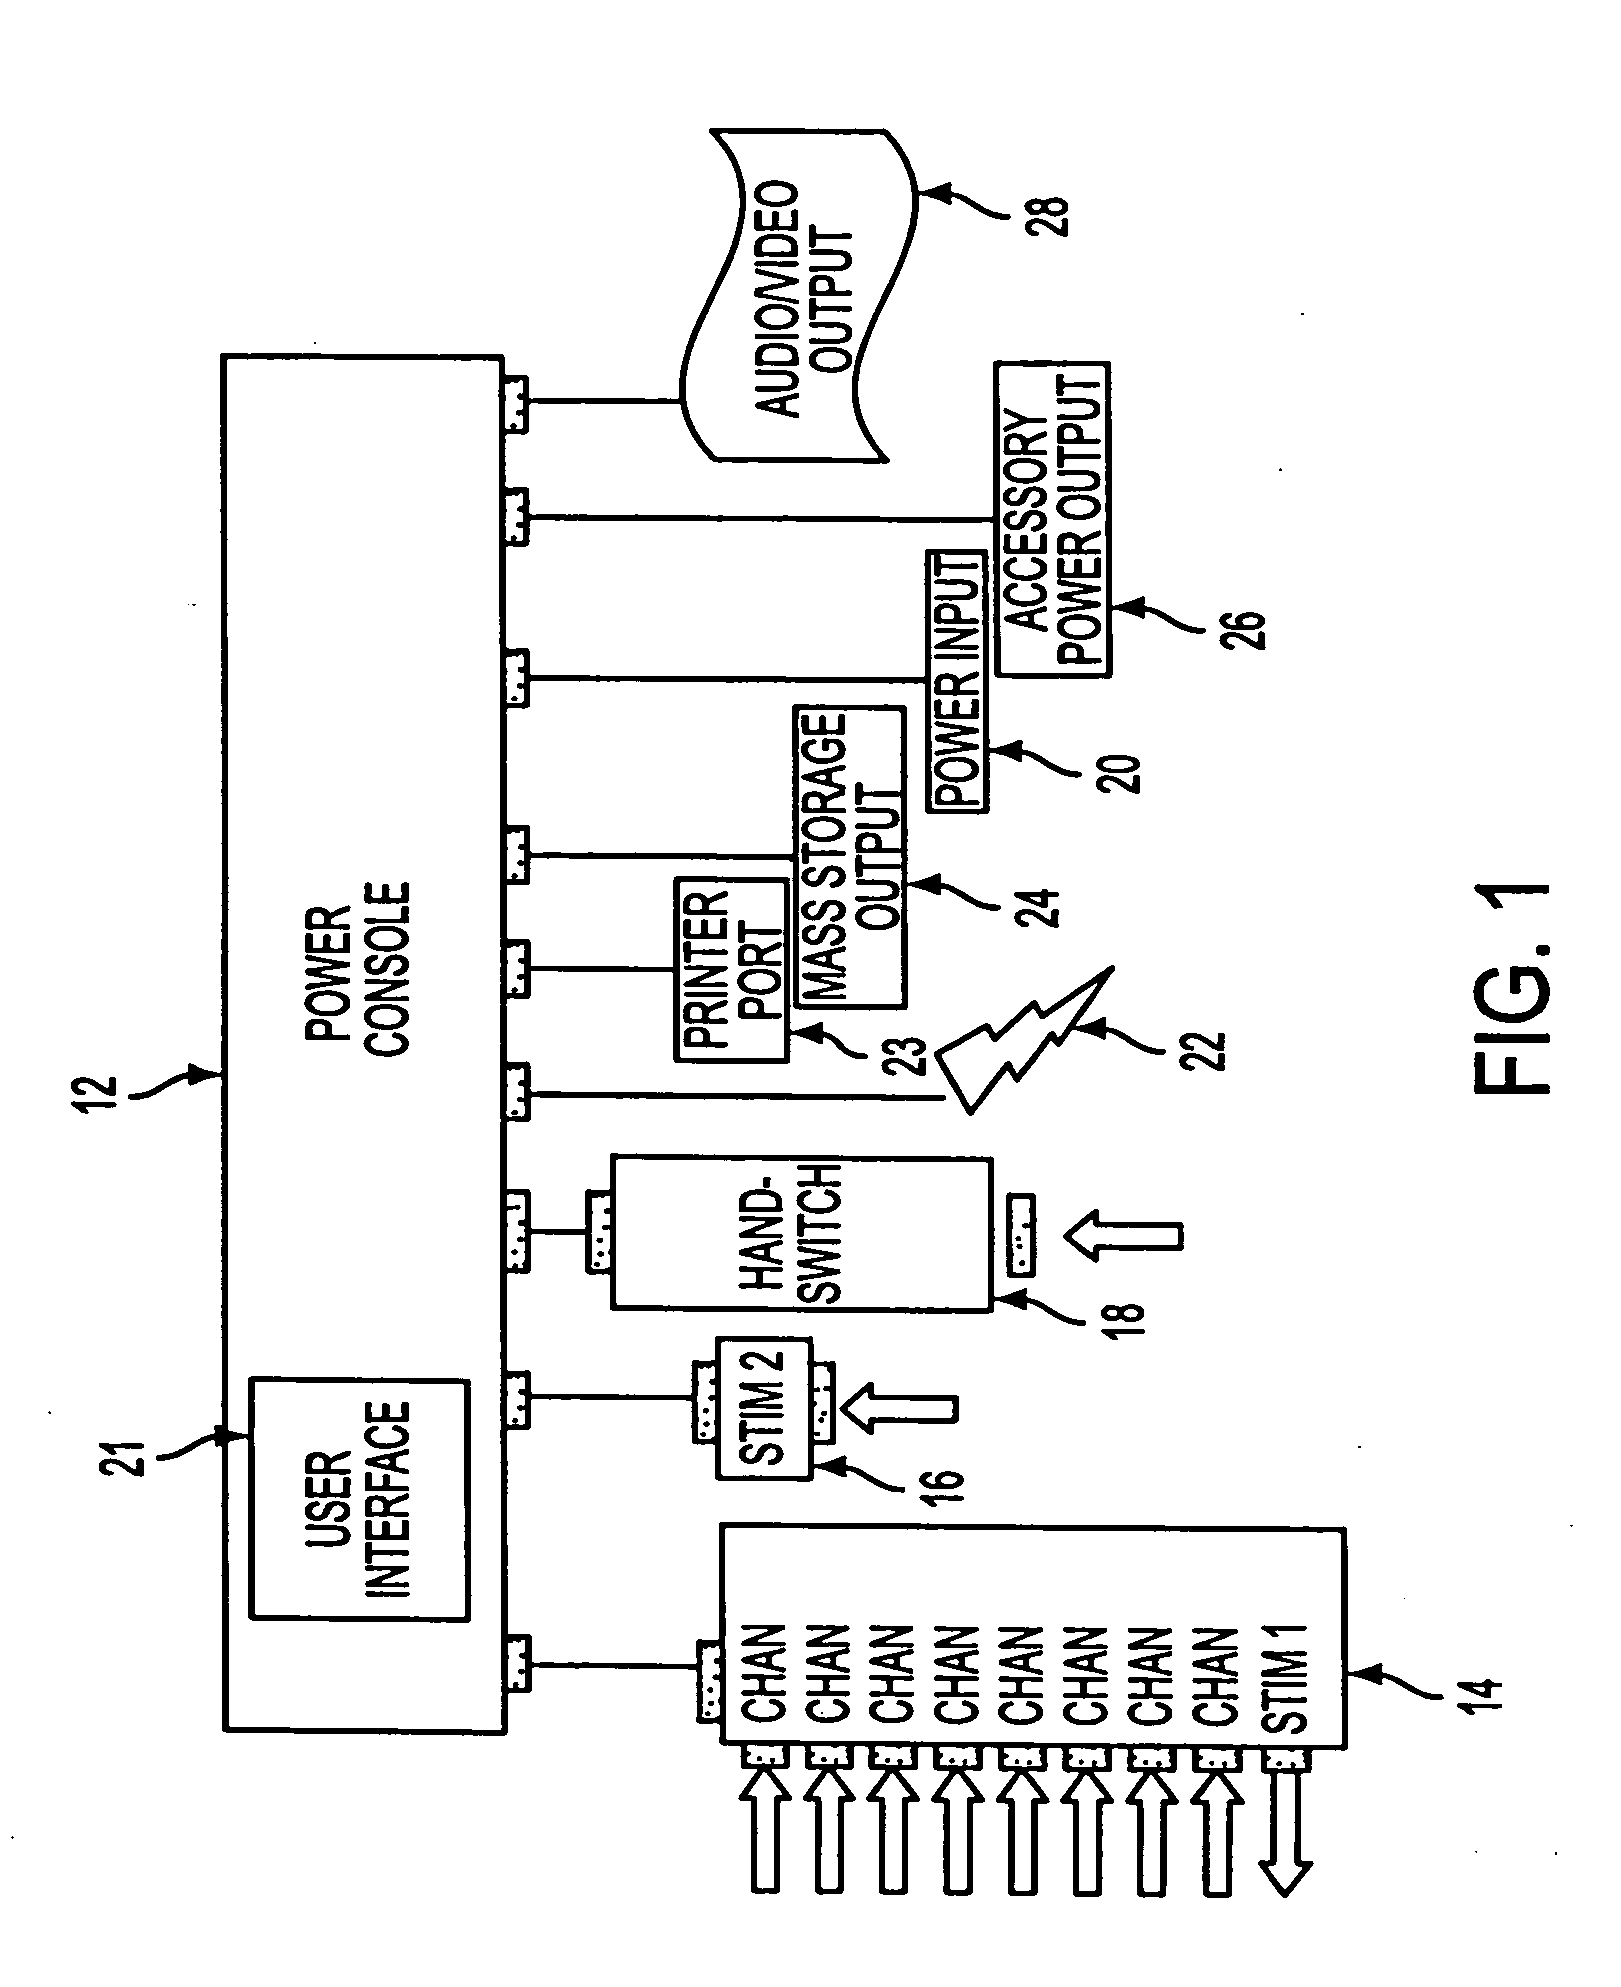 Apparatus and method for intraoperative neural monitoring